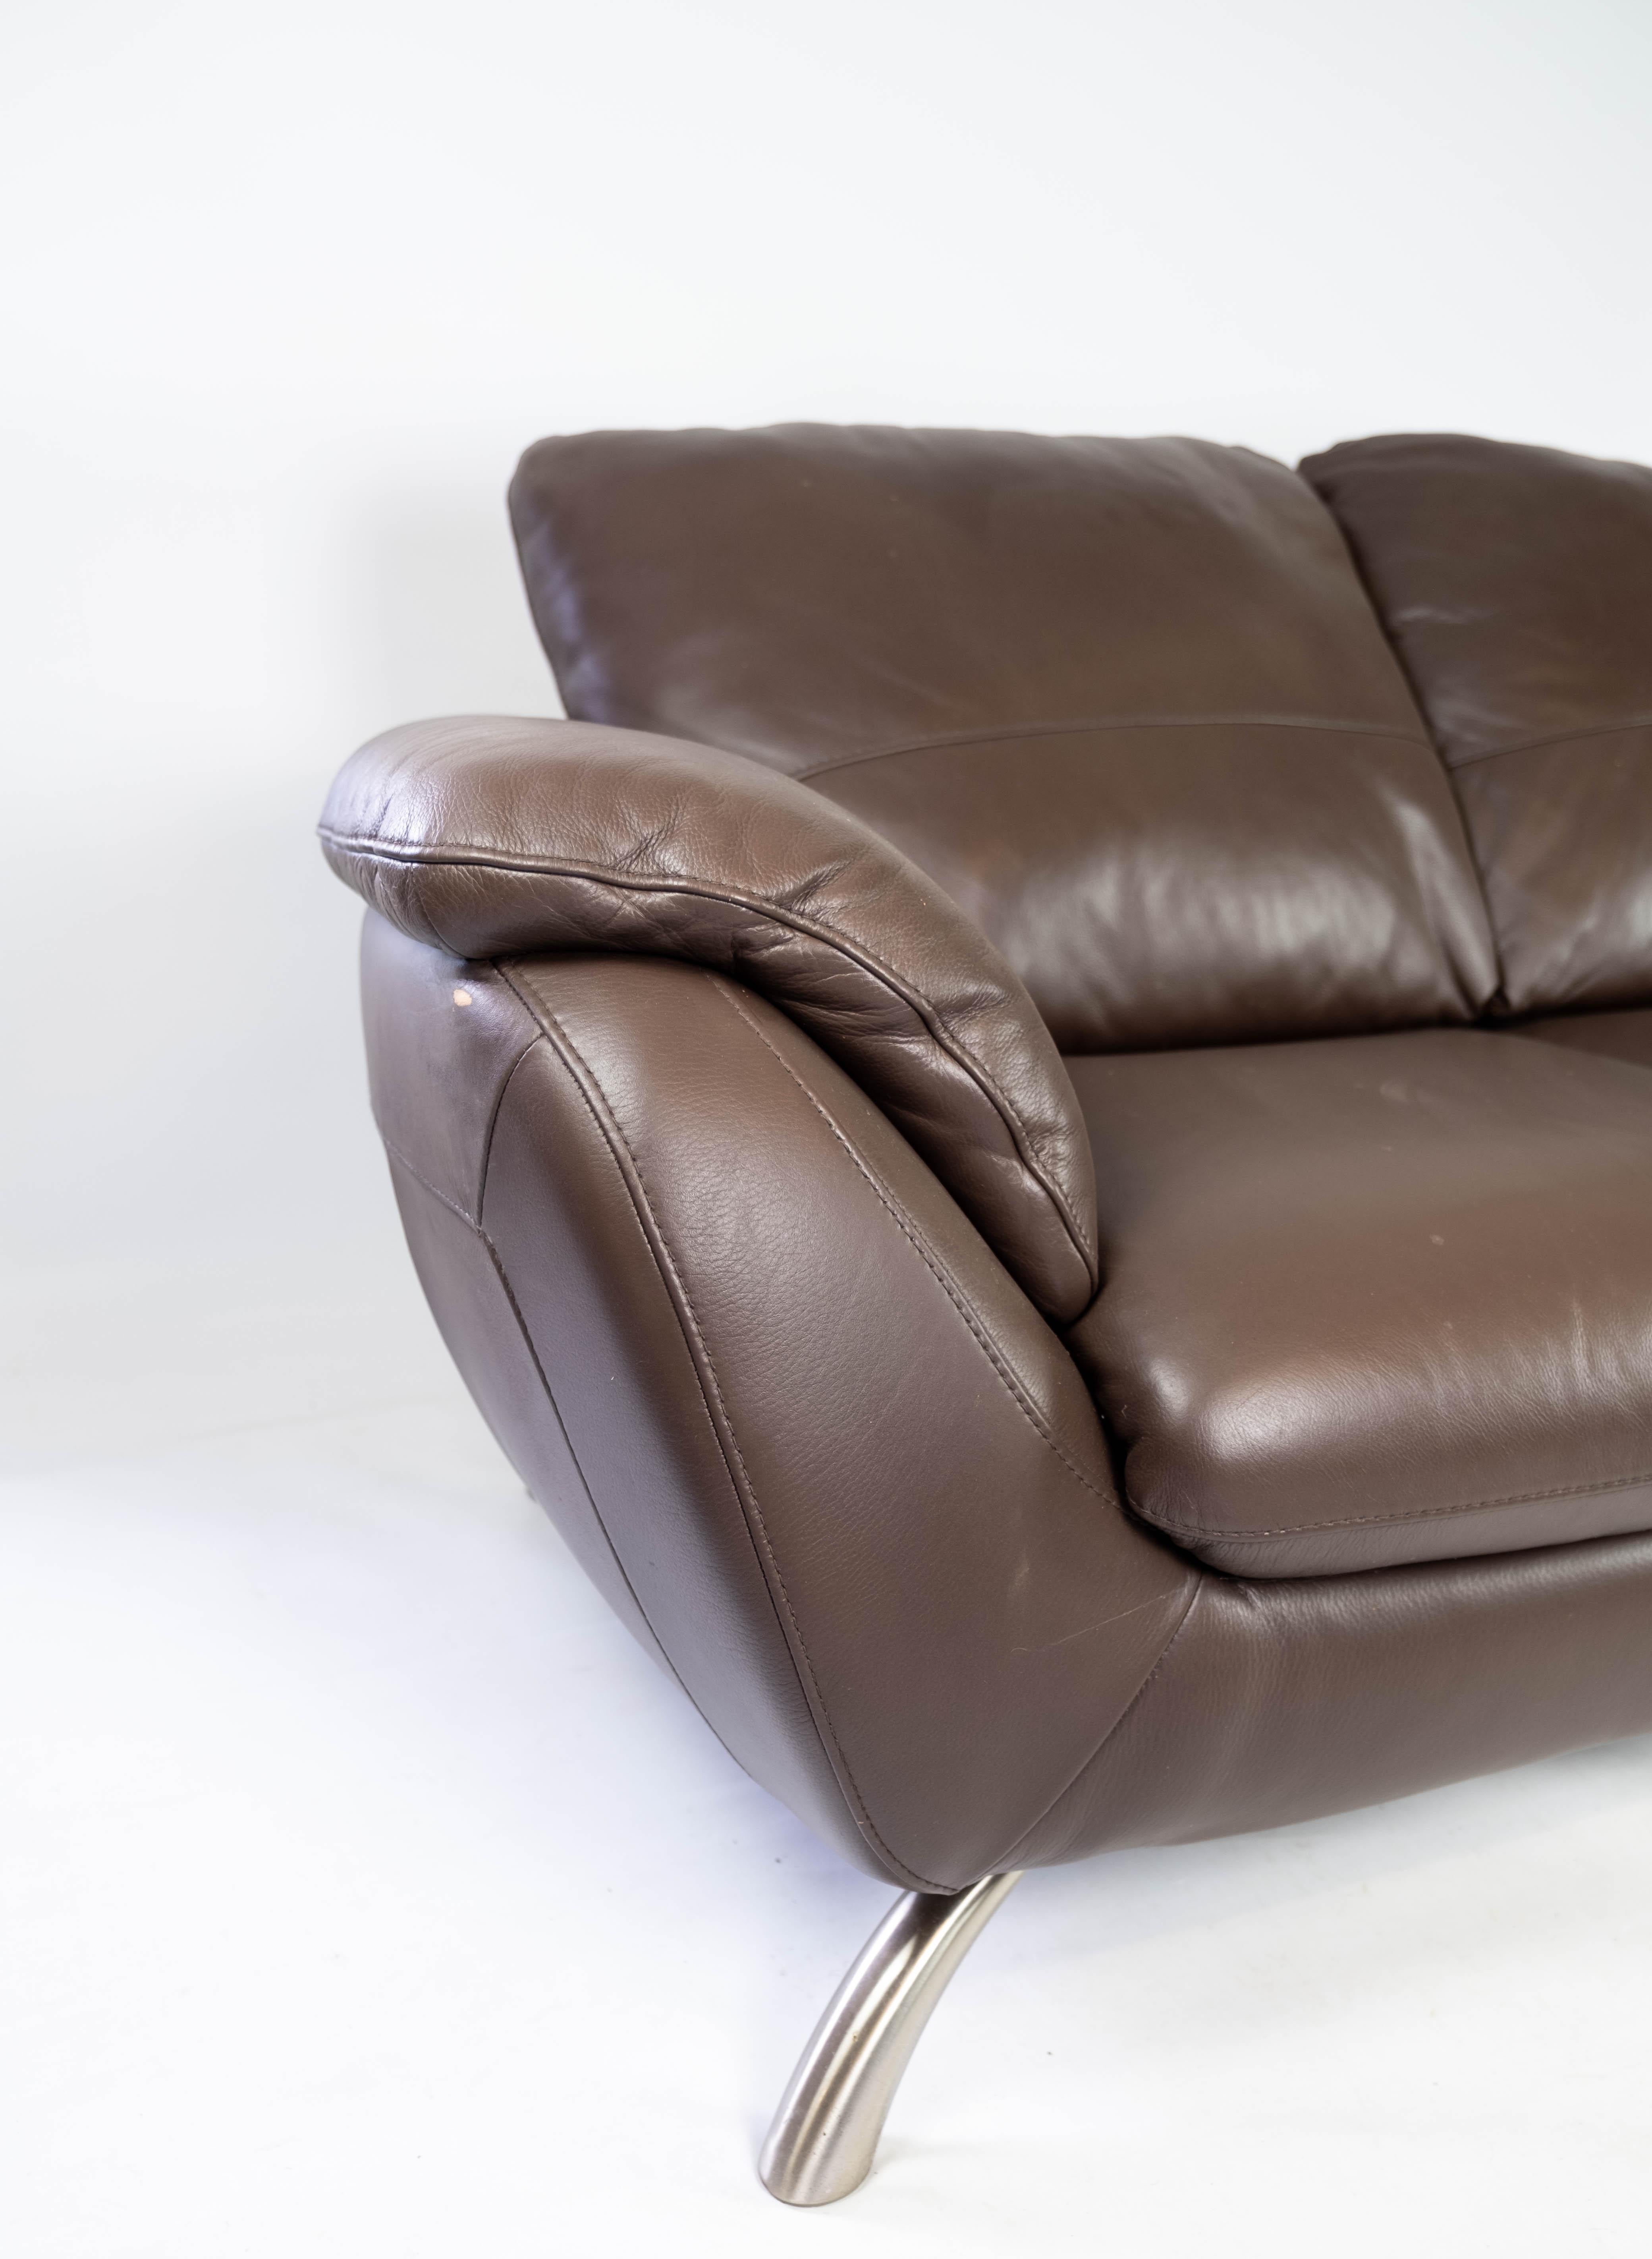 Late 20th Century Two Seater Sofa Upholstered with Brown Leather and Frame of Metal, by Italsofa